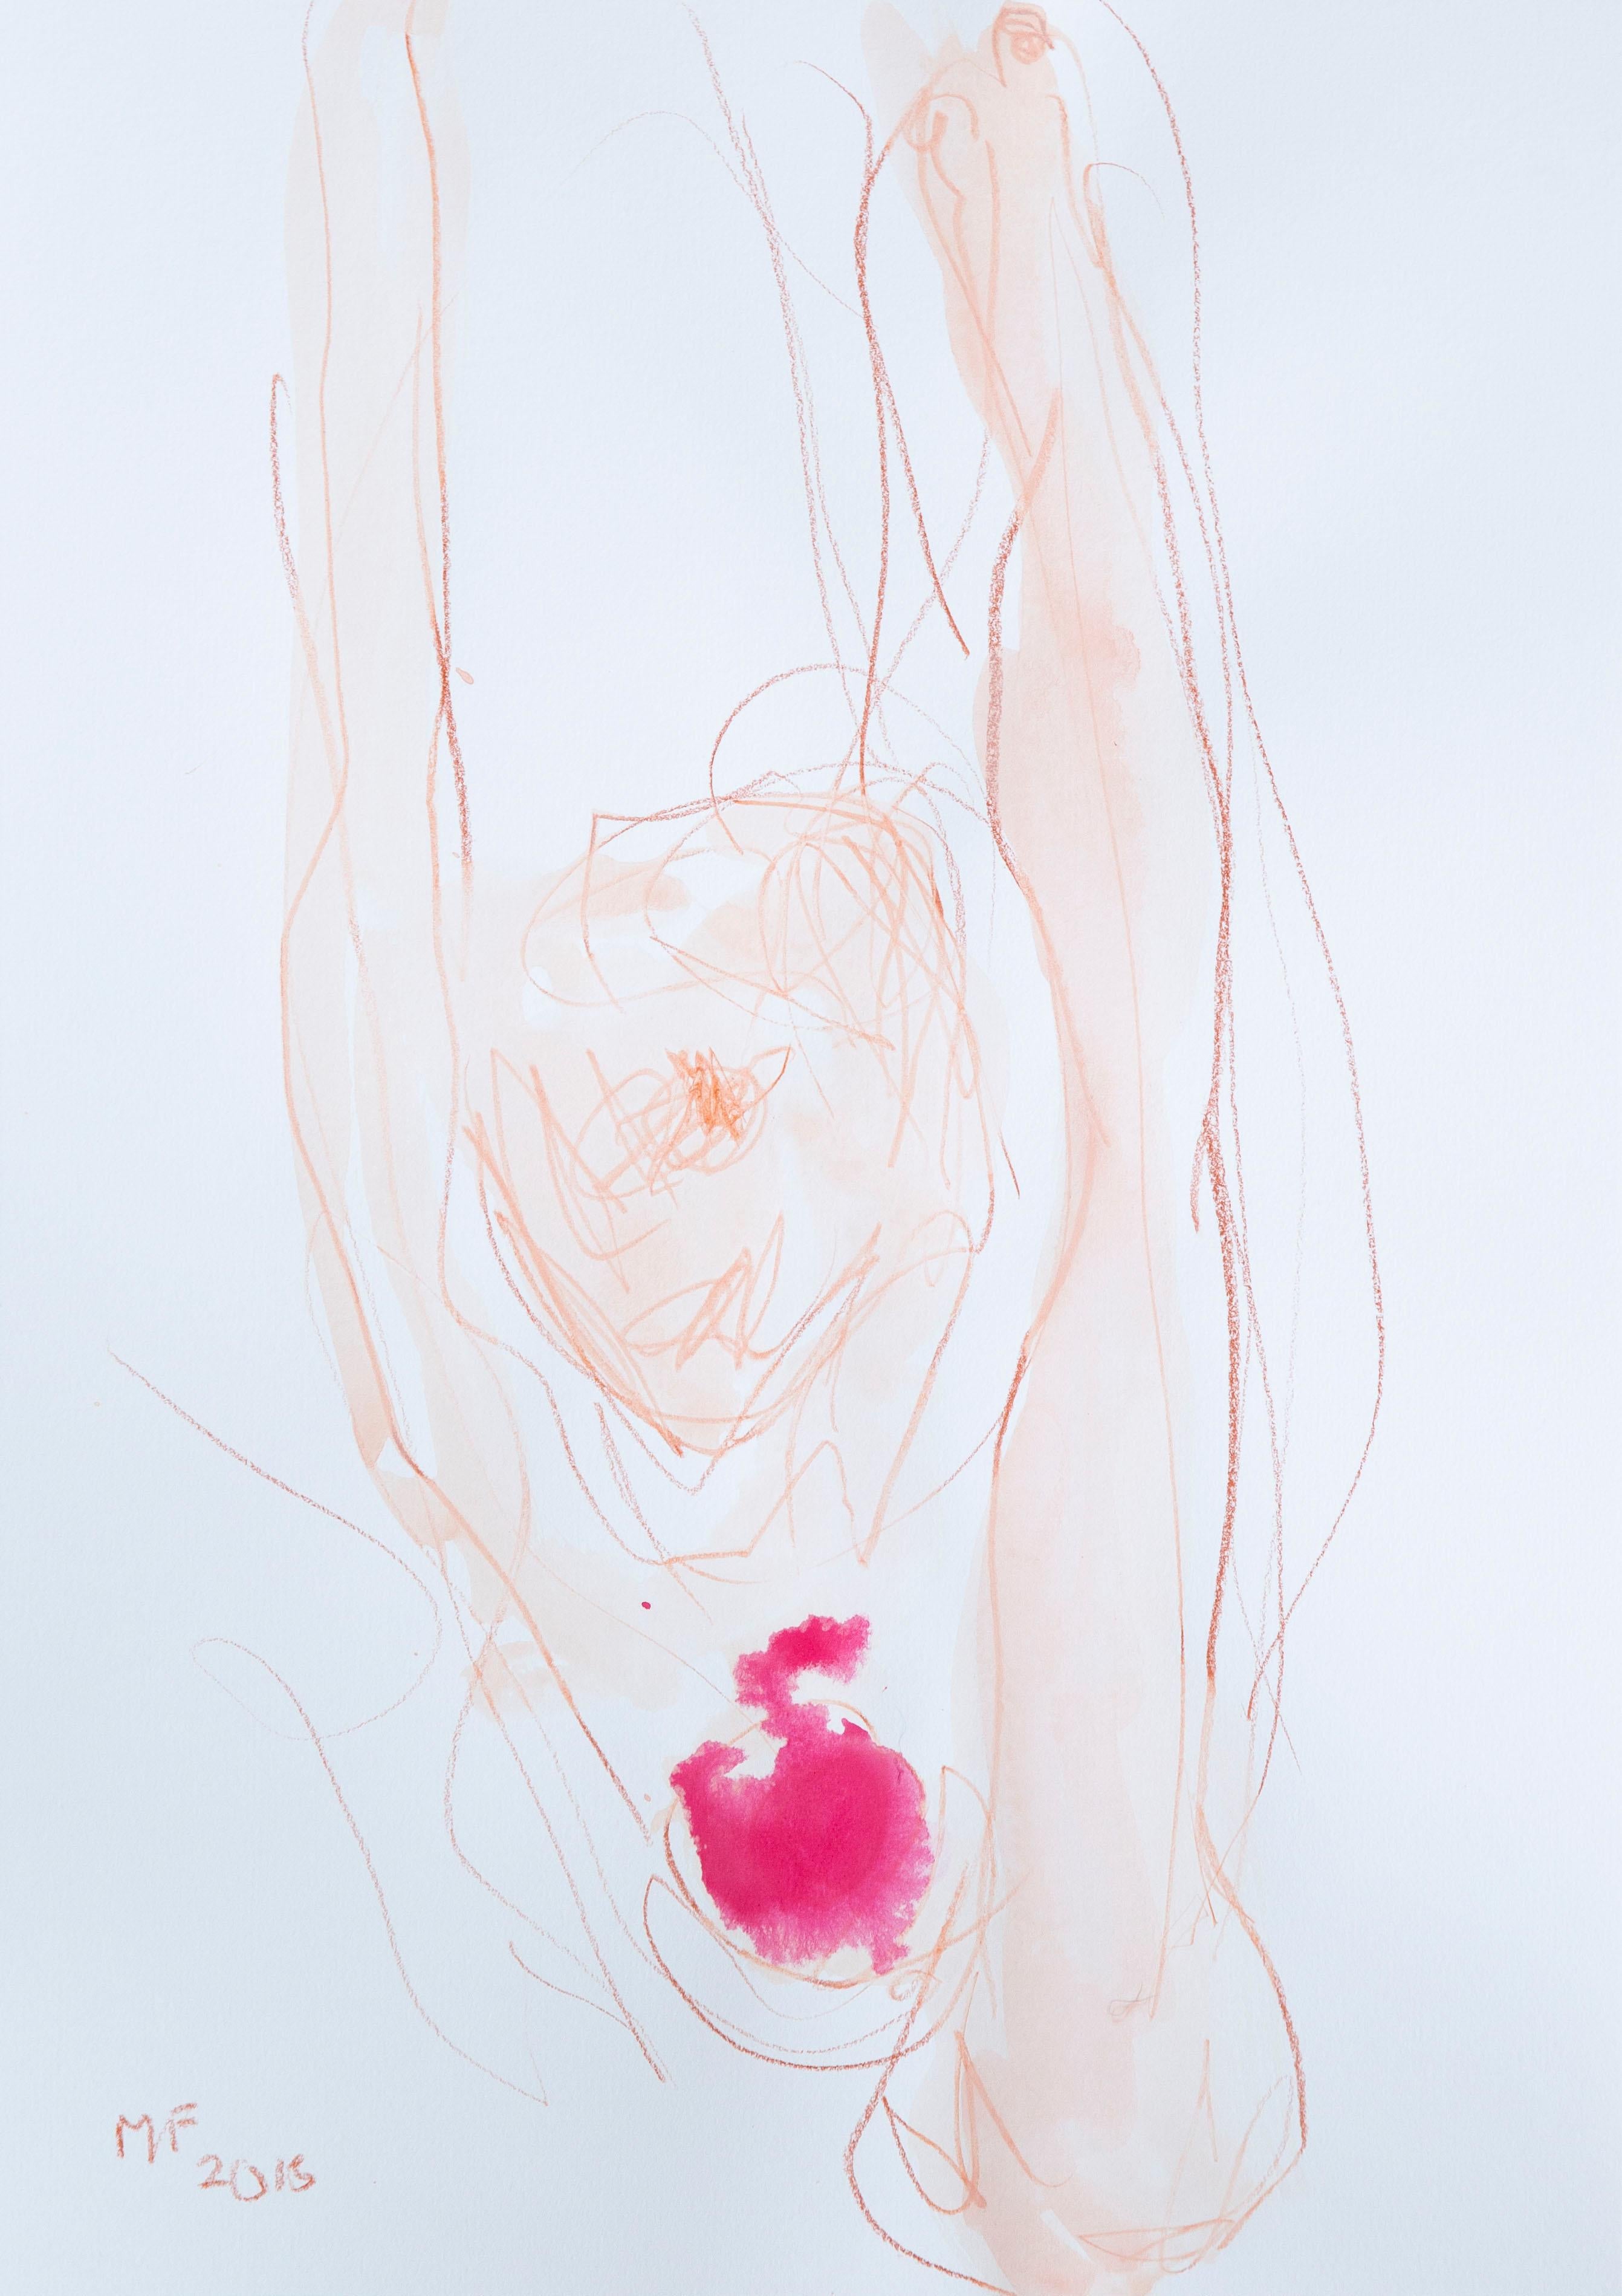 A beautiful intimate, emotional drawing by Marliz Frencken. Made with pencil and watercolor, in soft colors, of a naked woman.

Curator Jan Hoet once wrote: “Frencken uses ‘over the top’ as an artistic principle in her work. Extreme are the flirty